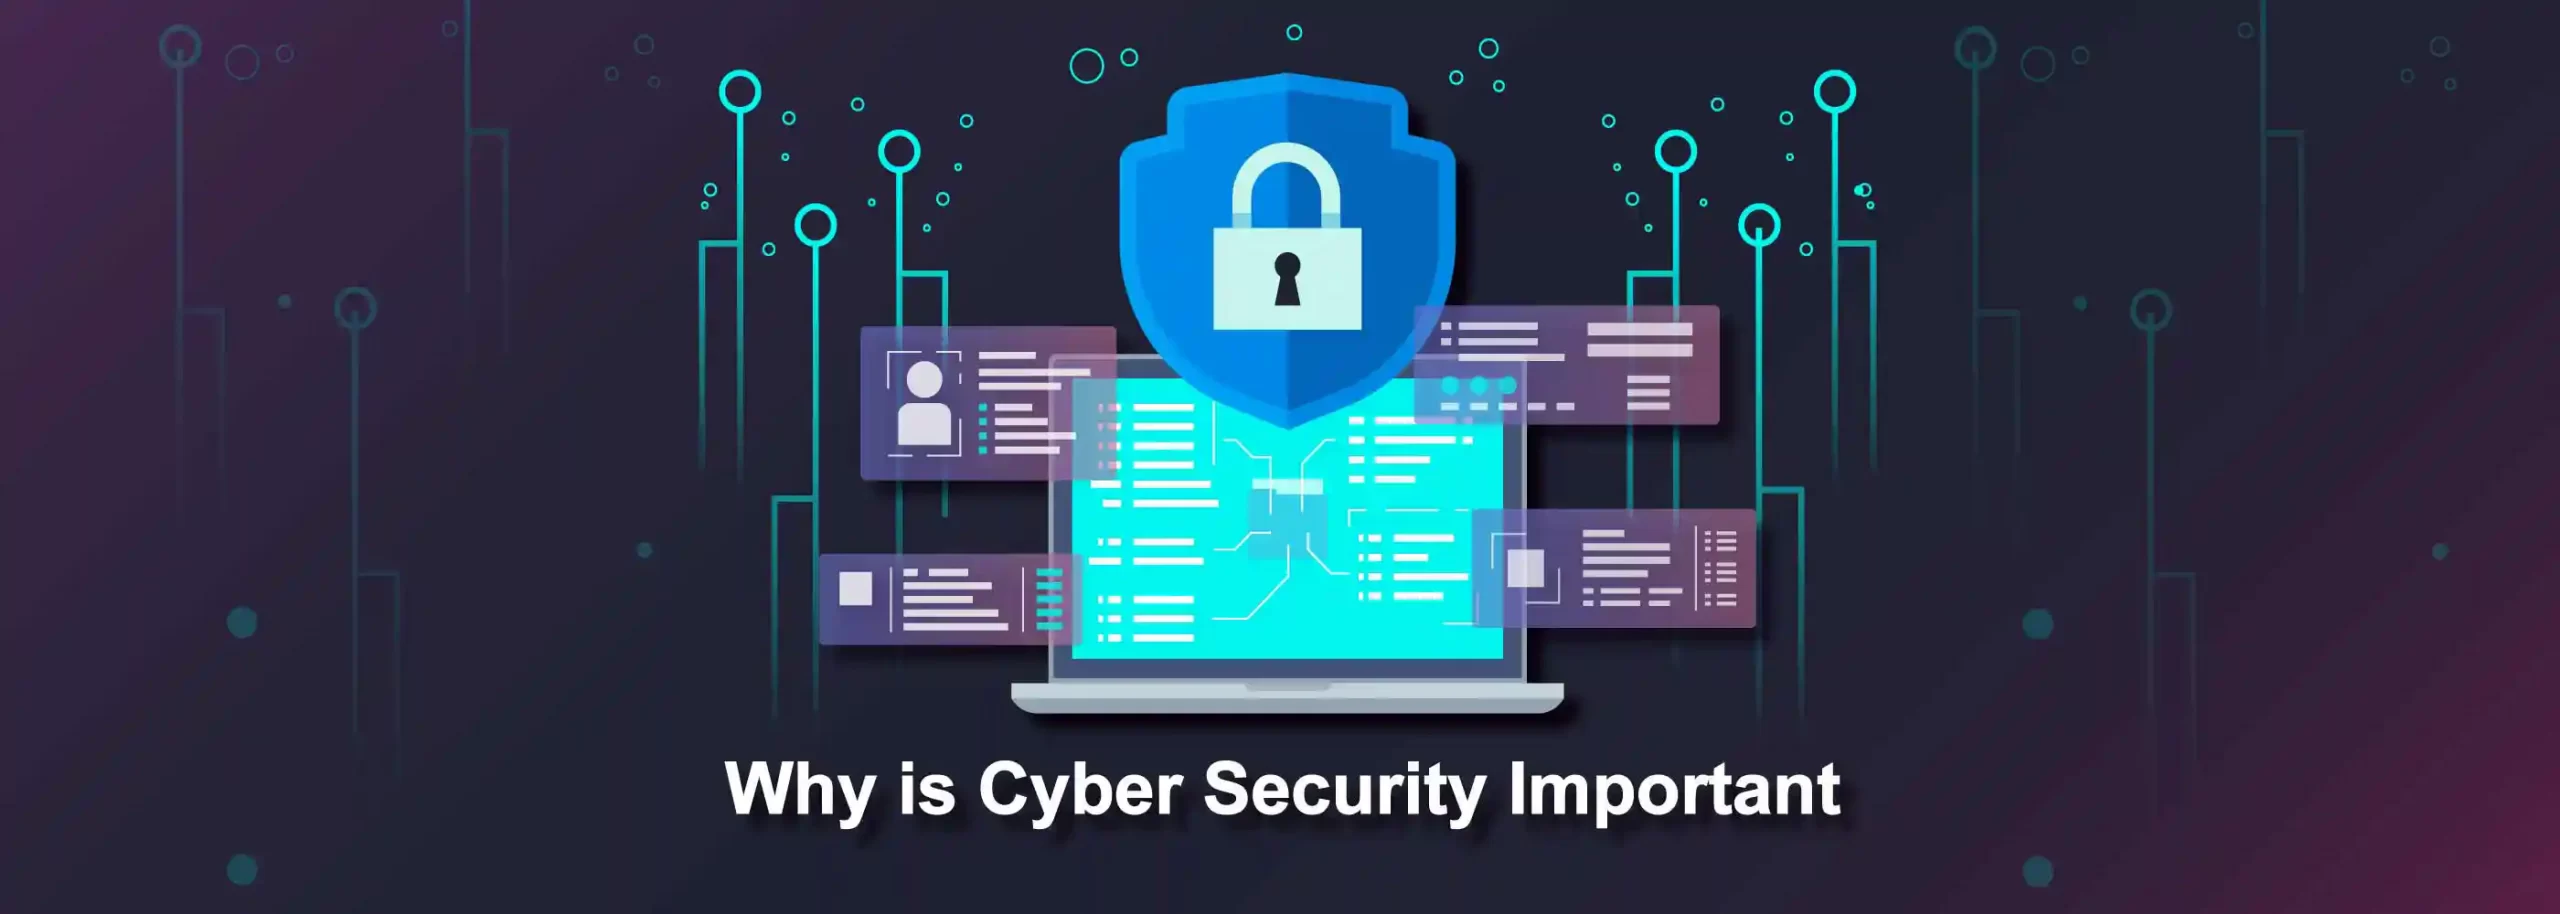 Why is Cyber Security Important